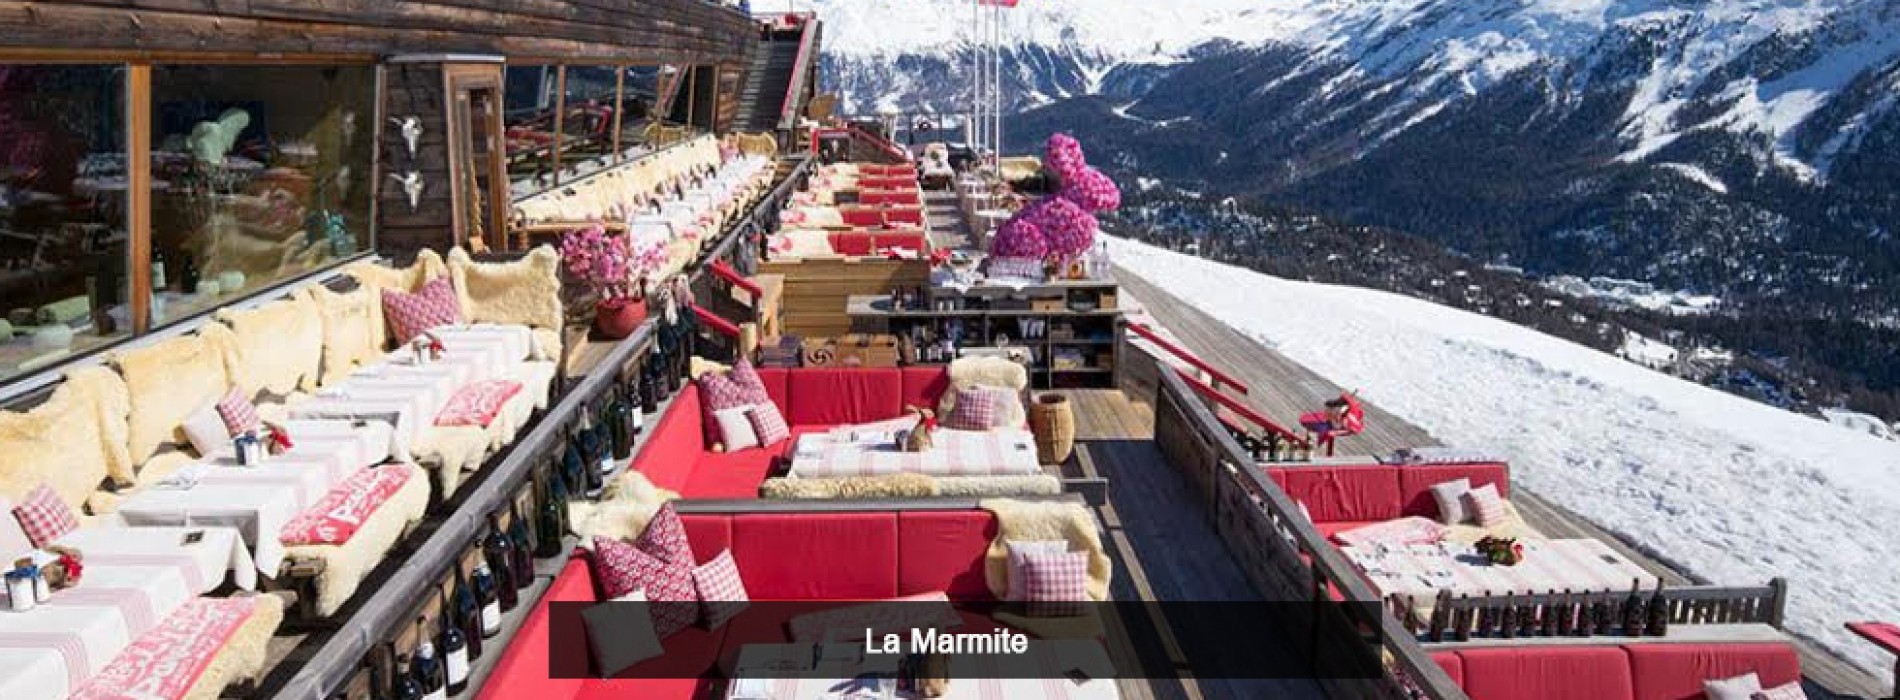 A foodie’s guide to St. Moritz and the Engadin Valley